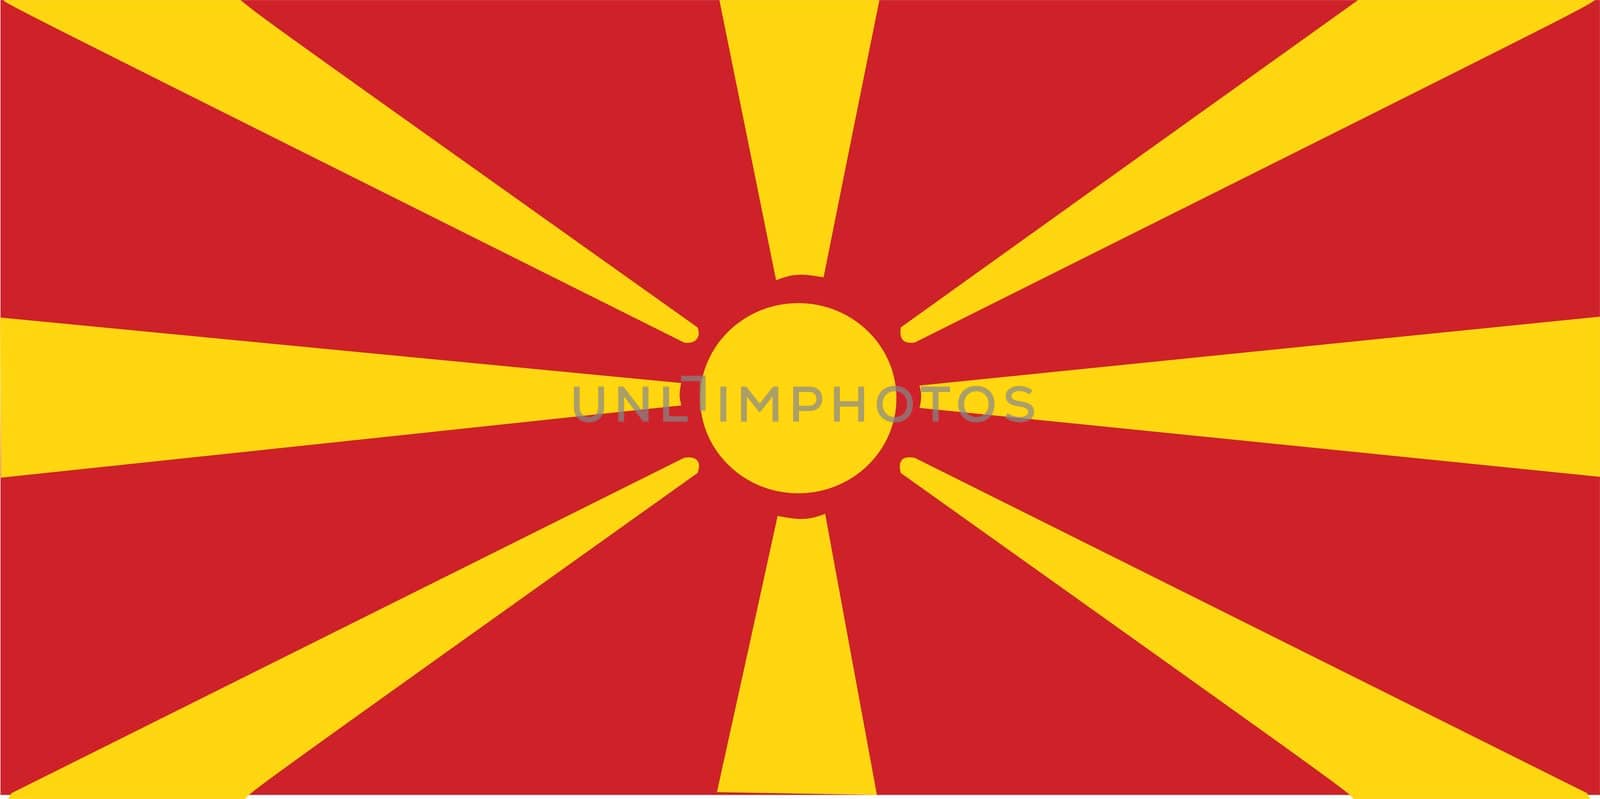 2D illustration of the flag of Macedonia vector